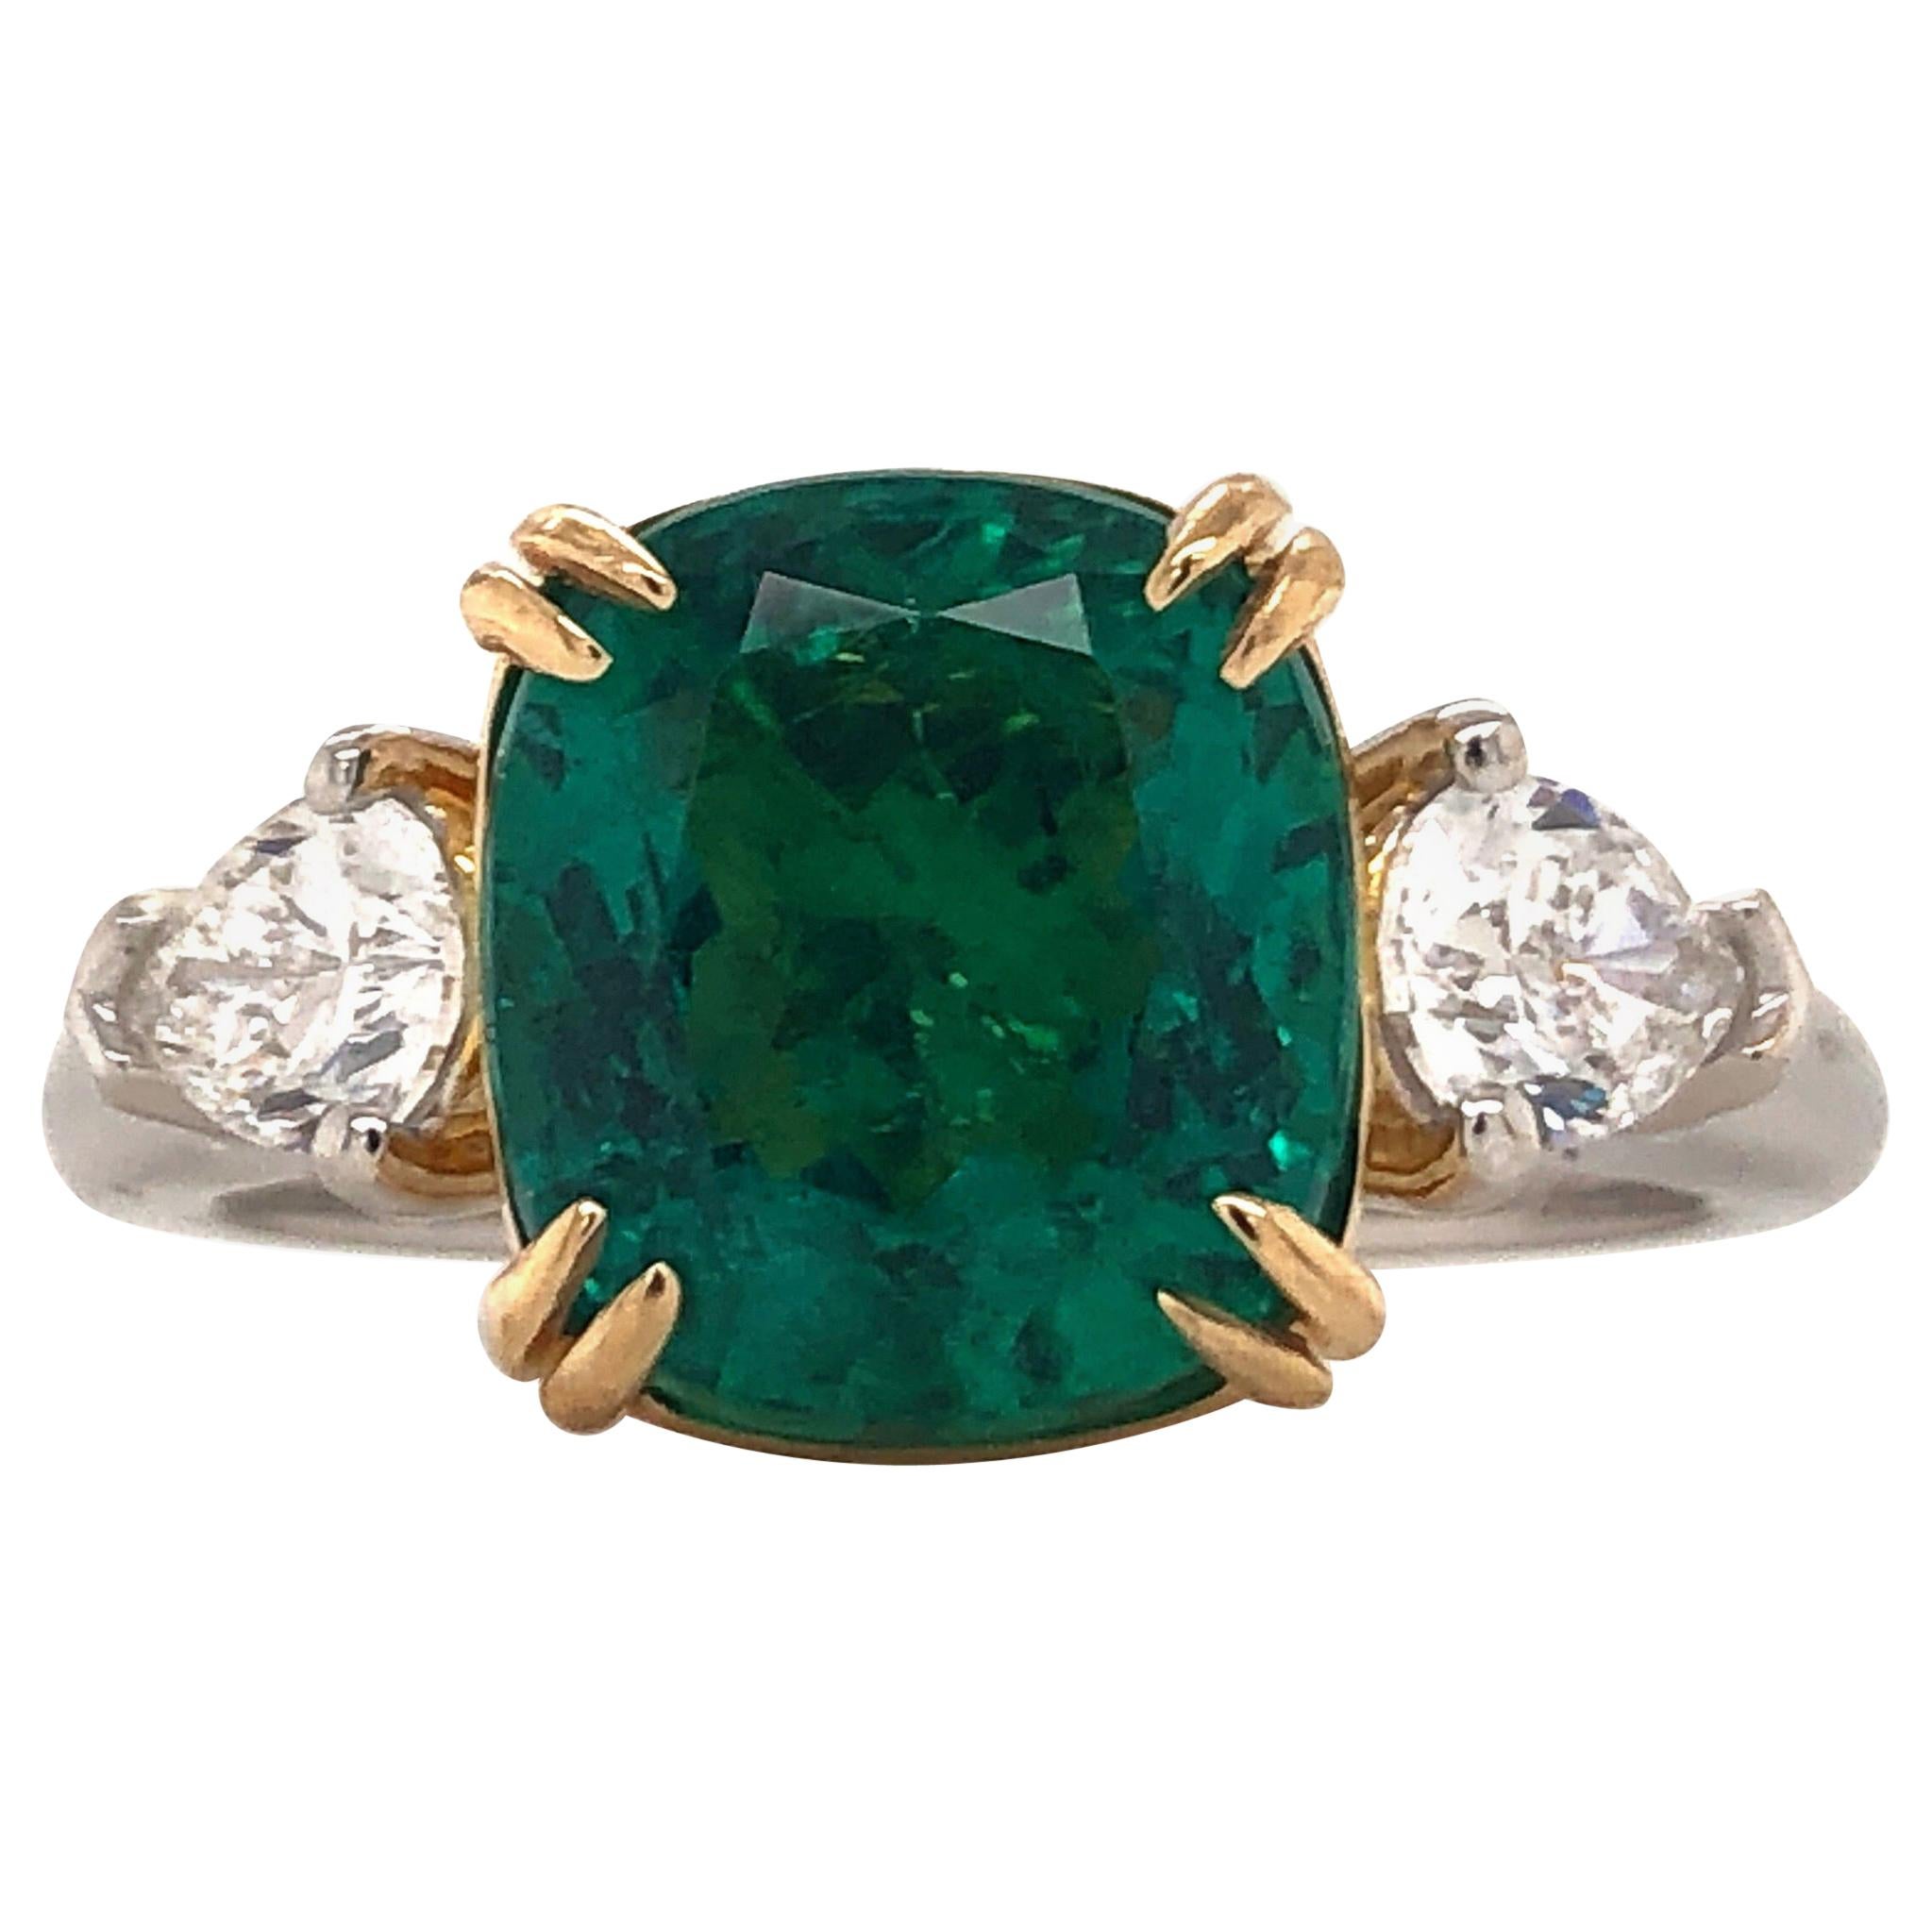 Created in the Emilio jewelry atelier. Showcasing a cushion shape 3.57ctct Genuine natural certified Emerald. This emerald is certified as no oil/untreated/no clarity enhancement which makes up for .001% of emeralds available in the market. No oil